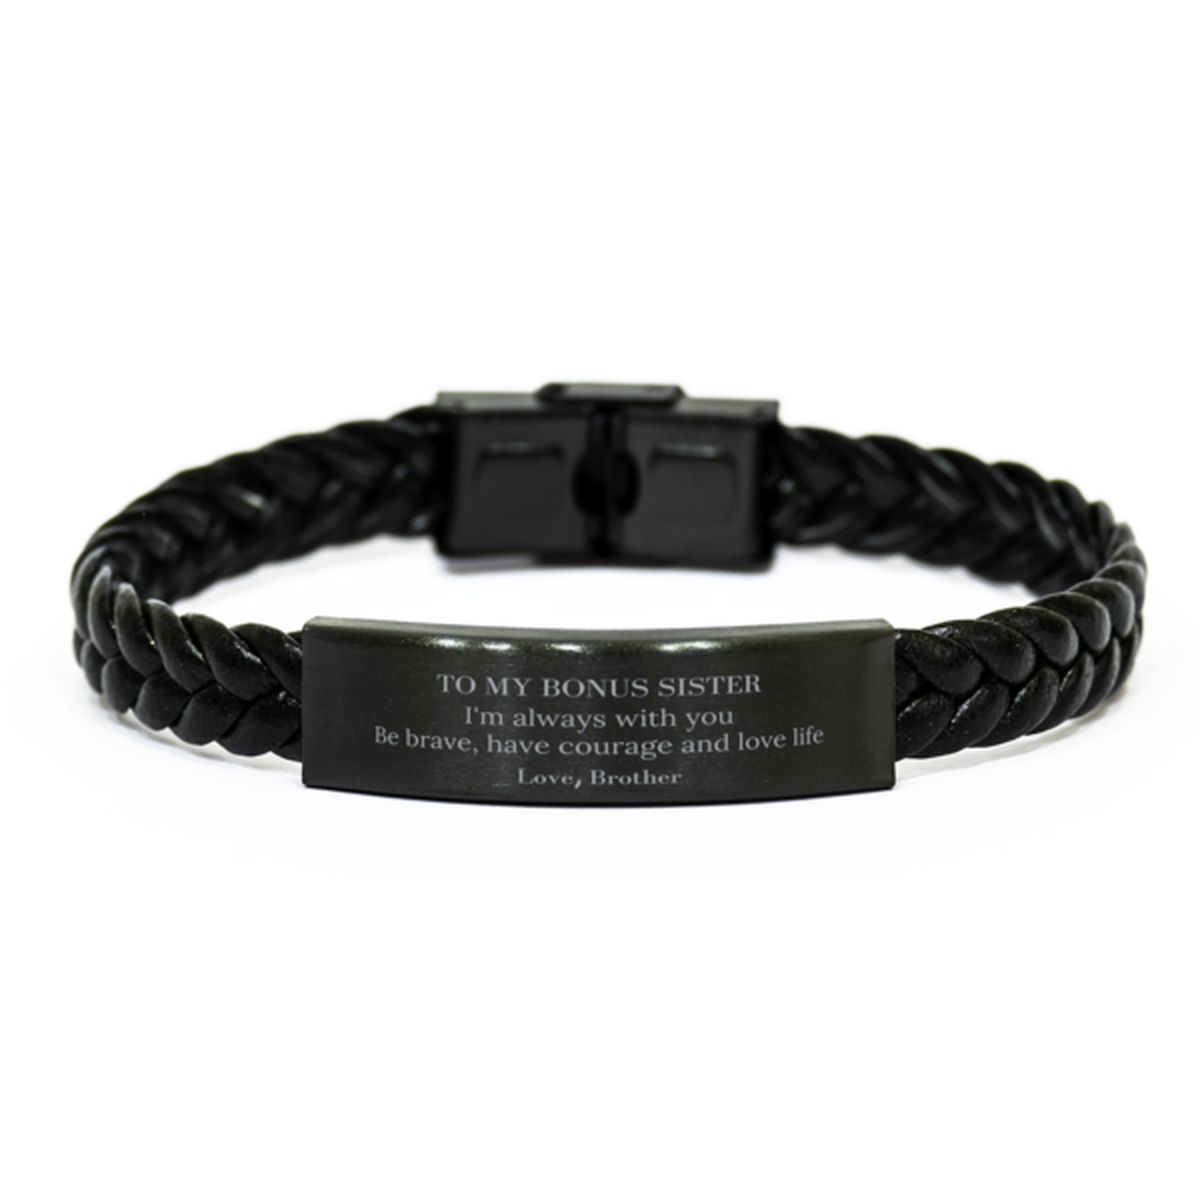 To My Bonus Sister Gifts from Brother, Unique Braided Leather Bracelet Inspirational Christmas Birthday Graduation Gifts for Bonus Sister I'm always with you. Be brave, have courage and love life. Love, Brother